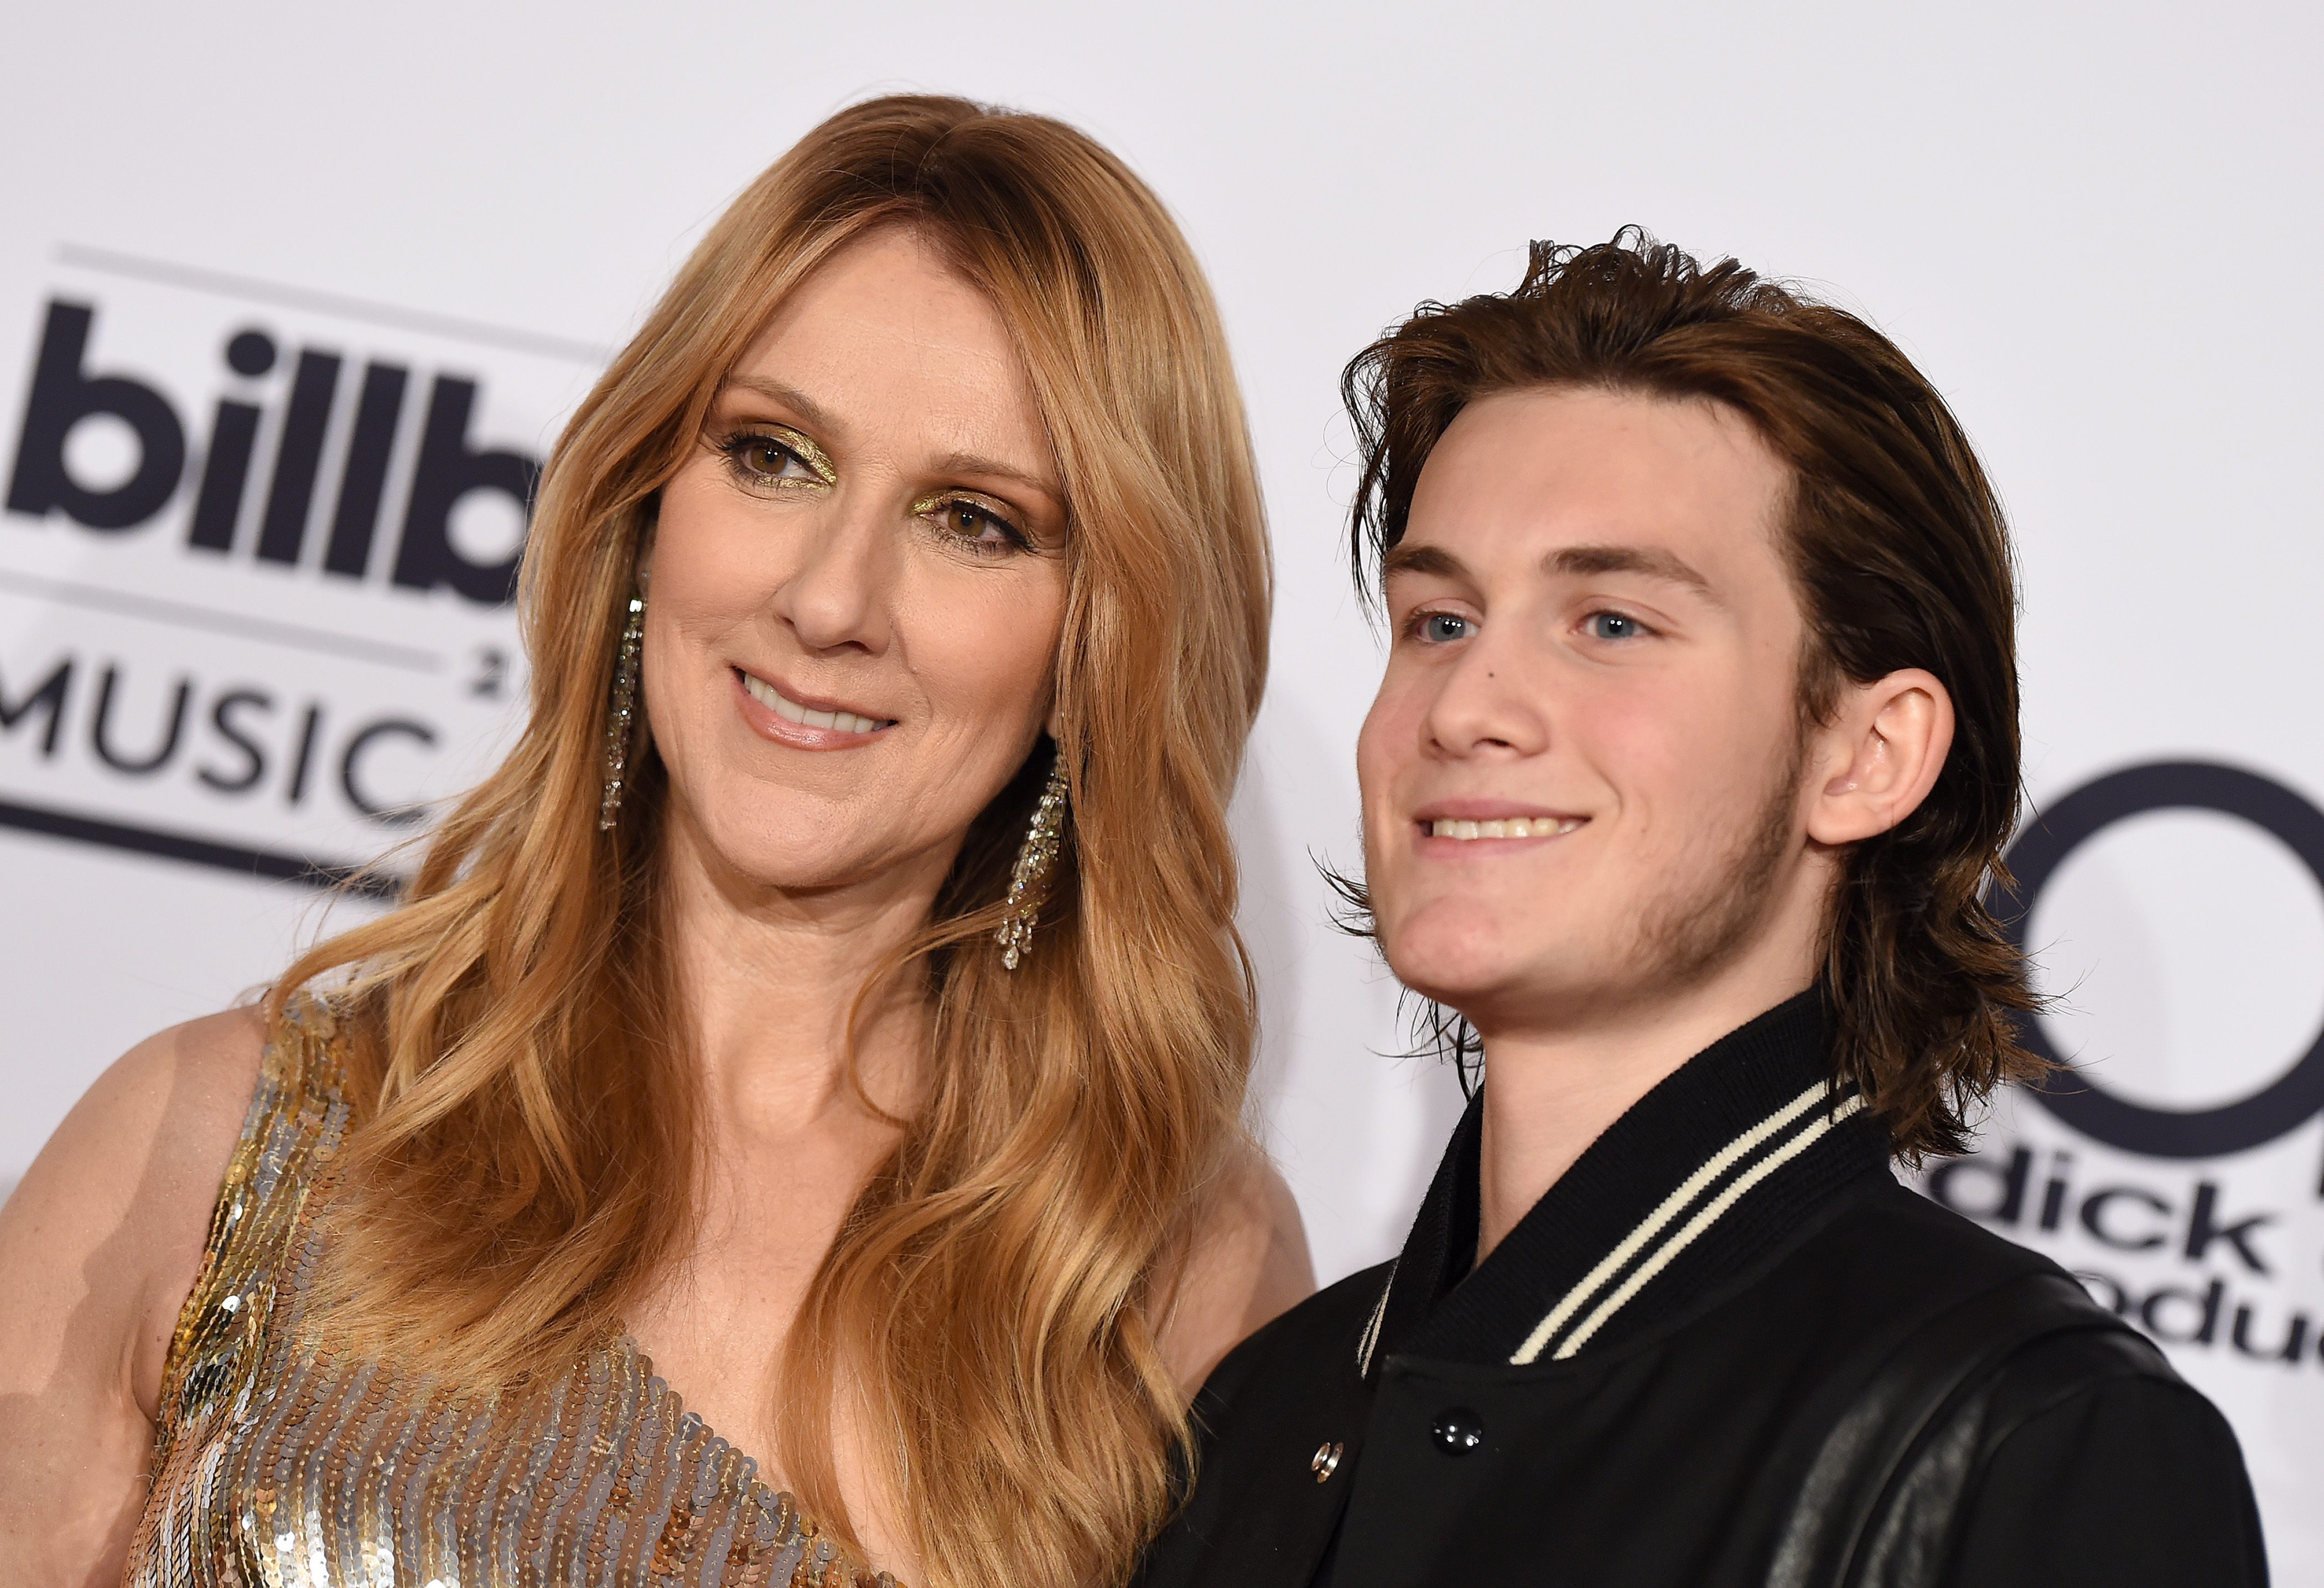 Singer Celine Dion and son Rene Charles Angelil pose in the press room at the 2016 Billboard Music Awards at T-Mobile Arena on May 22, 2016 in Las Vegas, Nevada | Source: Getty Images